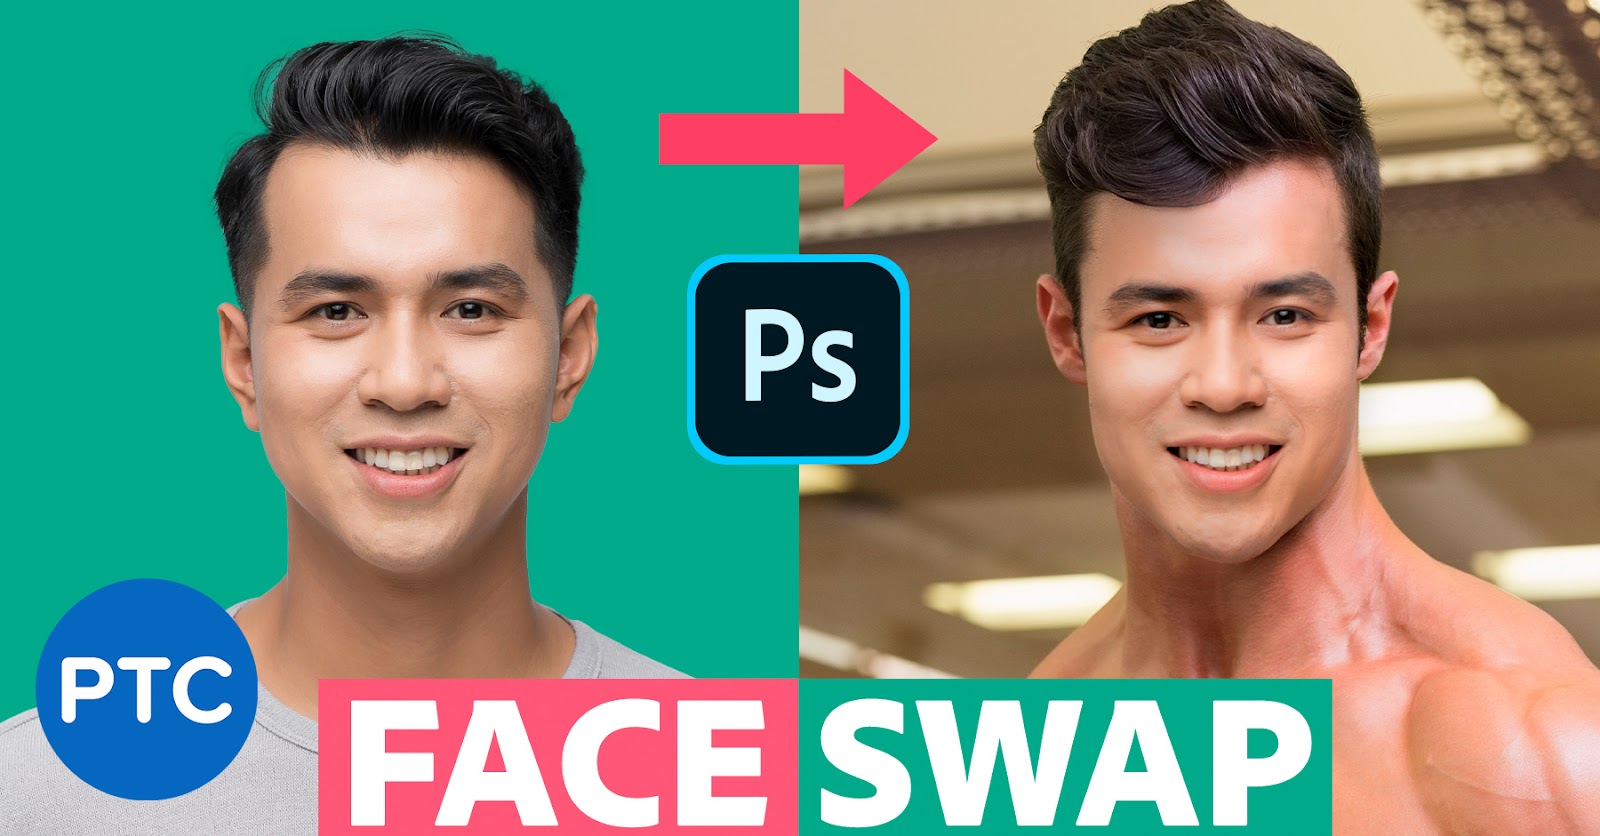 Face swap using Photoshop, step by step guide